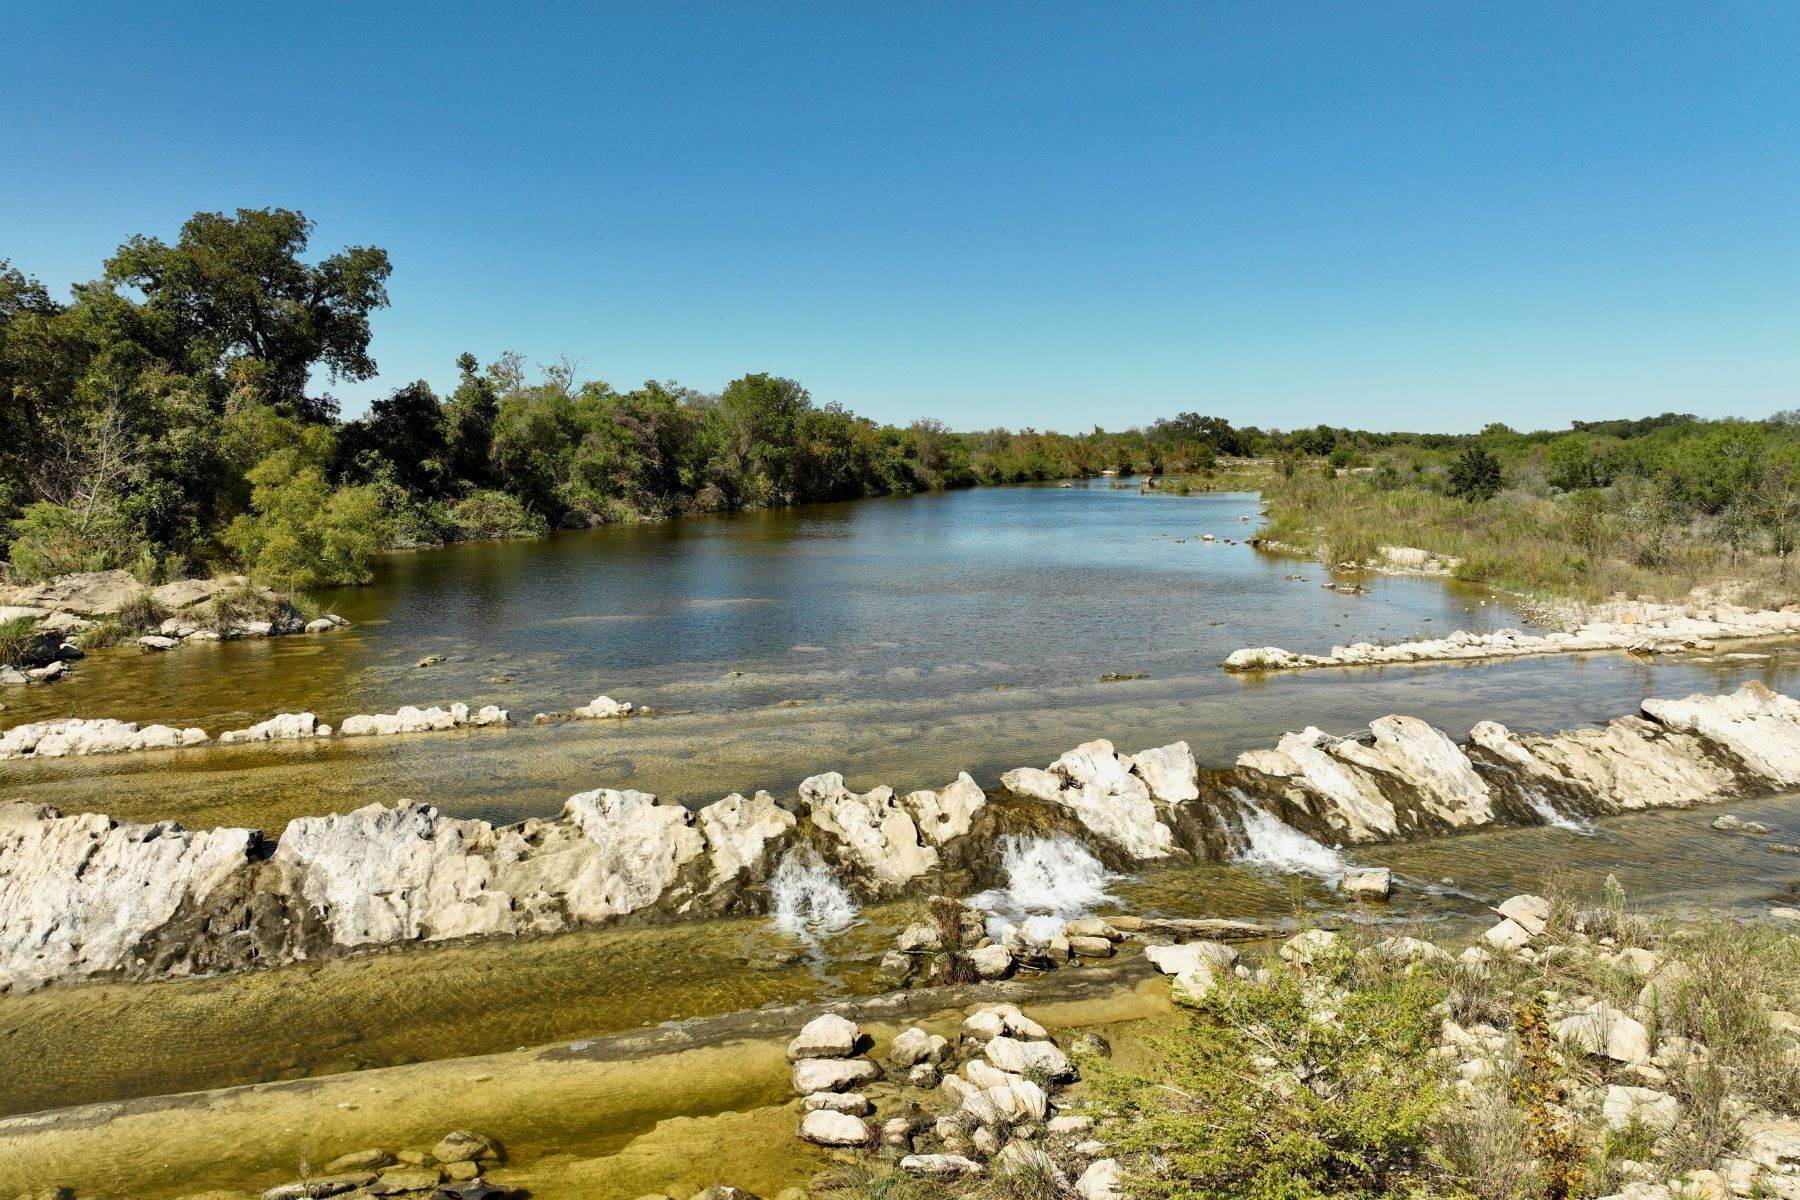 Farm and Ranch Properties for Sale at 8,472+/- Acres Nueces River Ranch, Uvalde-Zavala County, Uvalde, TX 78801 8,472+/- Acres Nueces River Ranch, Uvalde-Zavala County, FM 481 Uvalde, Texas 78801 United States